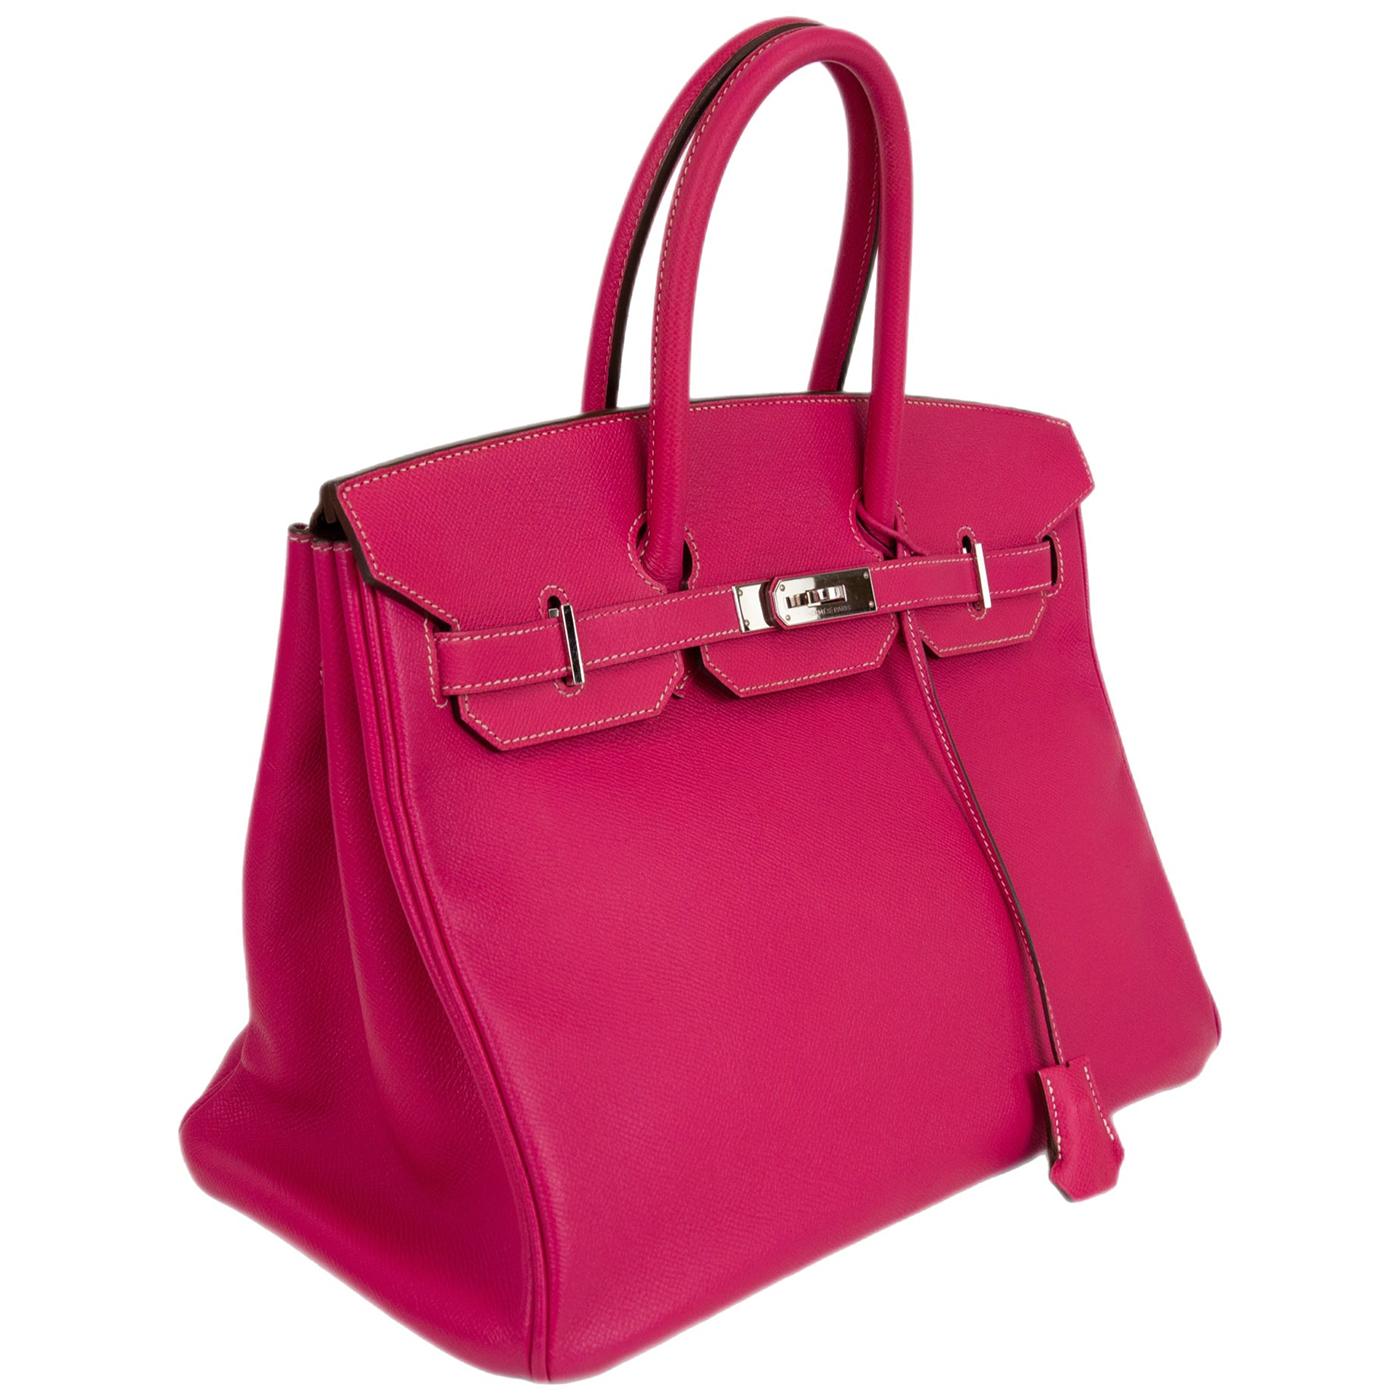 This two-tone Hermès Birkin 35 is handcrafted from Epsom leather in Rose Tyrien. The embossed Epsom leather is very soft to the touch, lightweight, and highly resistant to scratches, and topped with palladium hardware. Marked with the horseshoe